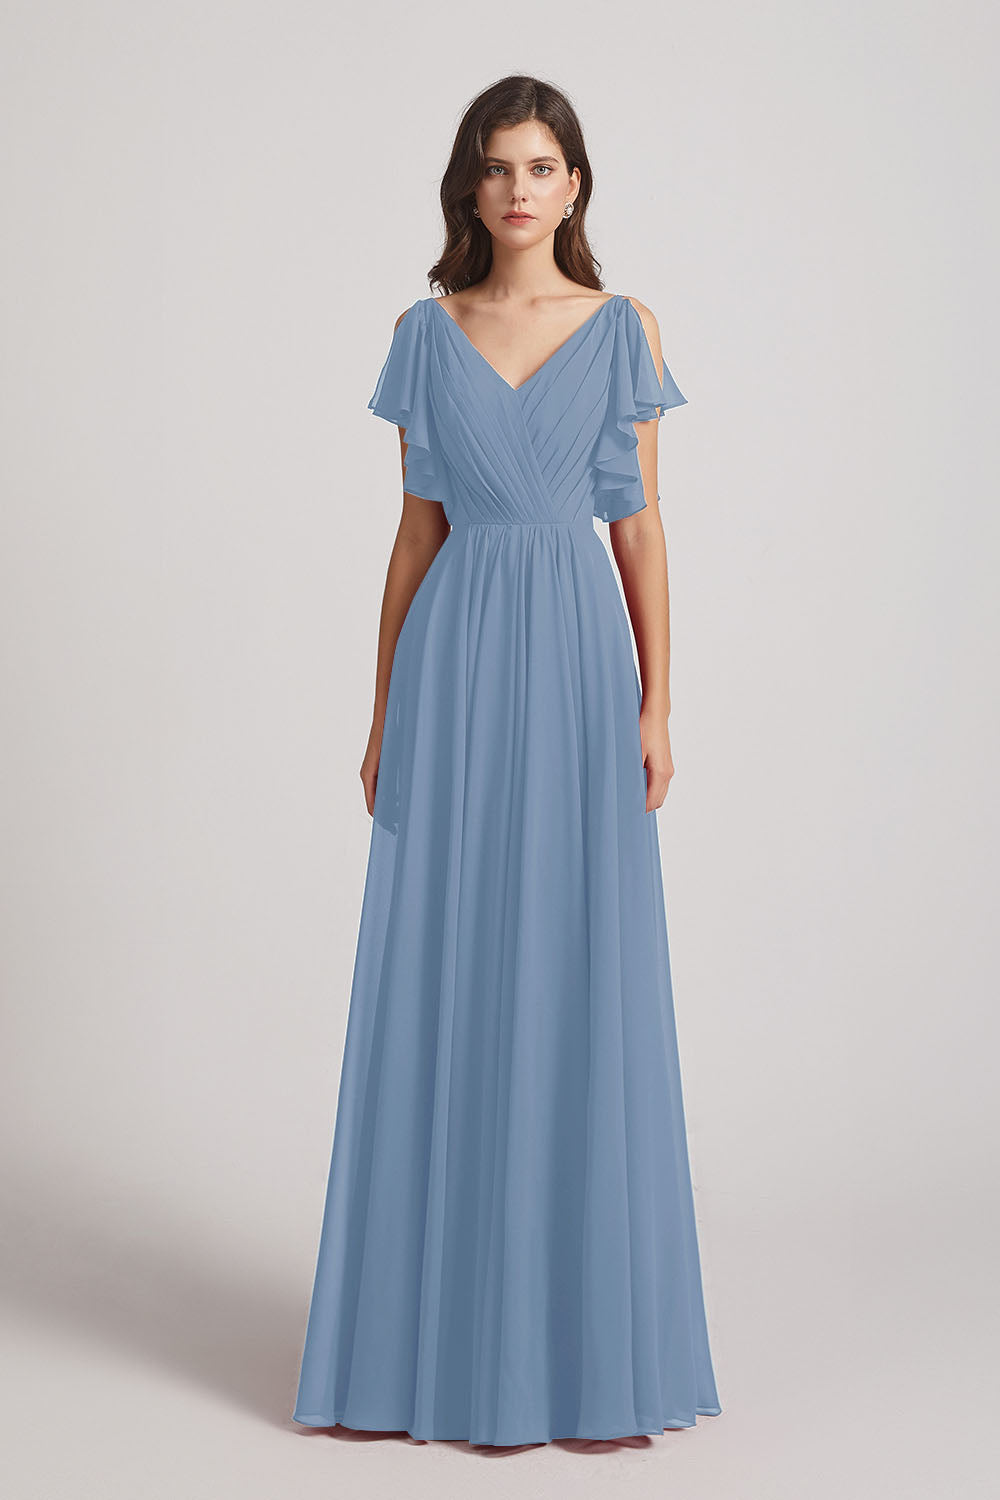 Alfa Bridal Dusty Blue V-Neck Pleated Chiffon Bridesmaid Dresses with Open Flutter Sleeves (AF0098)